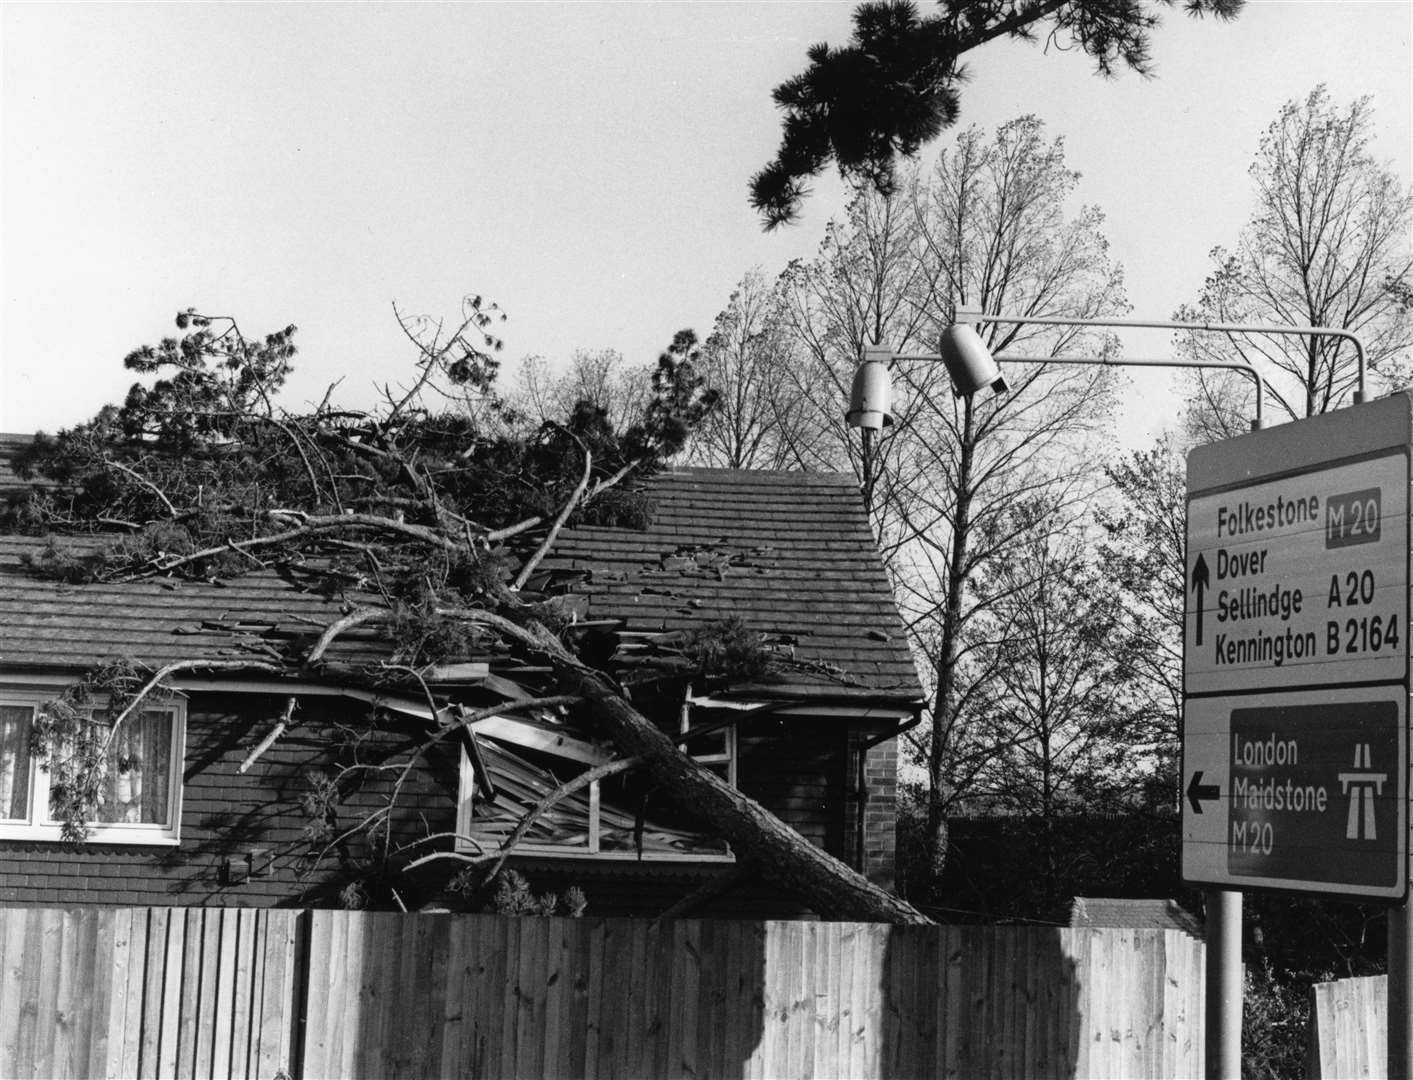 Great Storm 1987: A tree fell through the roof of a house in Hythe Road, Ashford